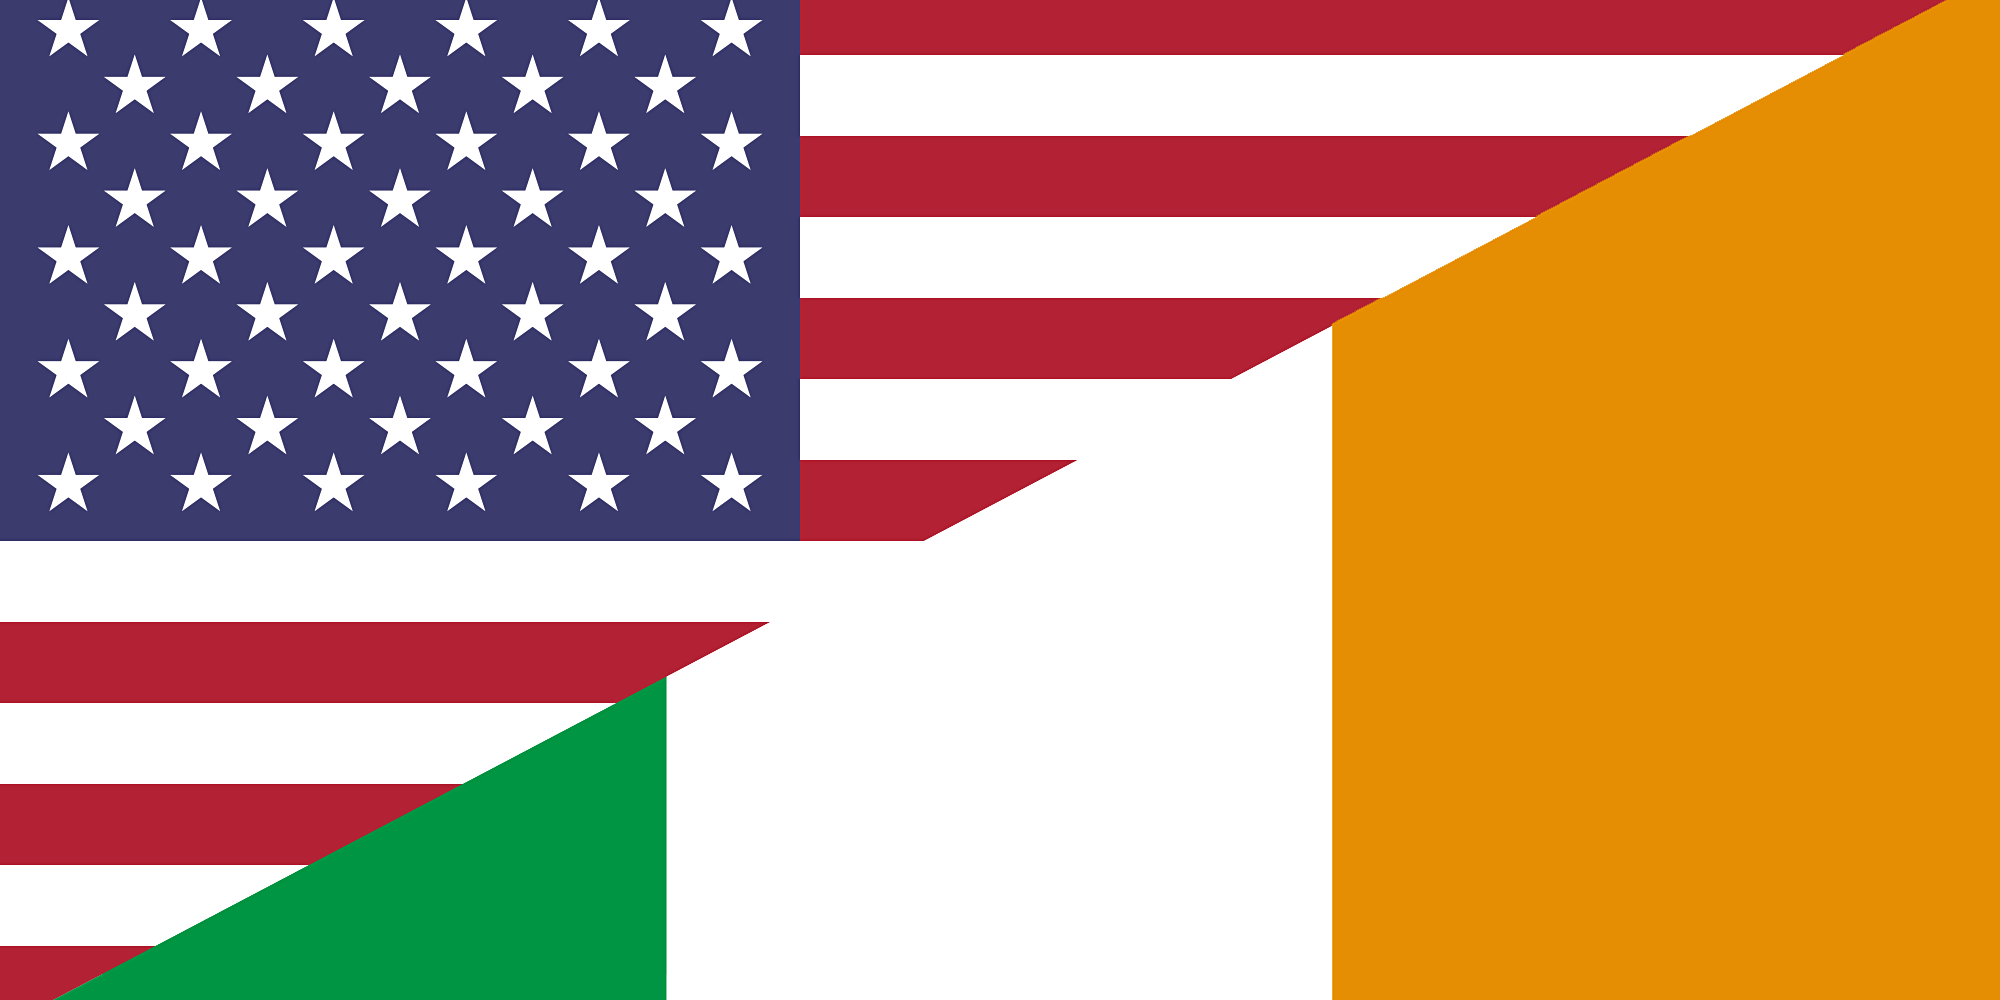 Friends of Irish Studies in the West present an online event this St. Patrick's Day